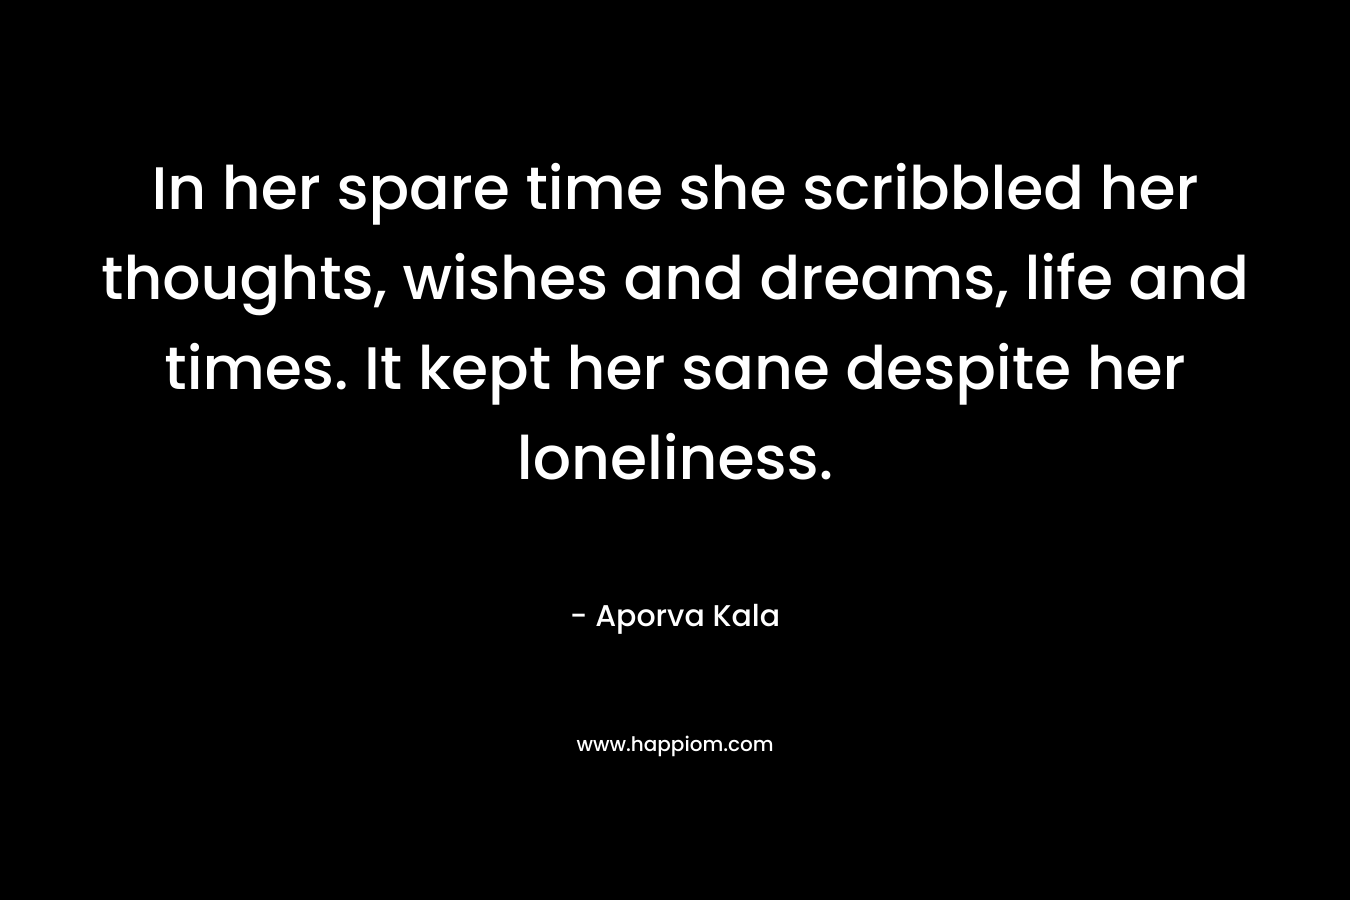 In her spare time she scribbled her thoughts, wishes and dreams, life and times. It kept her sane despite her loneliness. – Aporva Kala